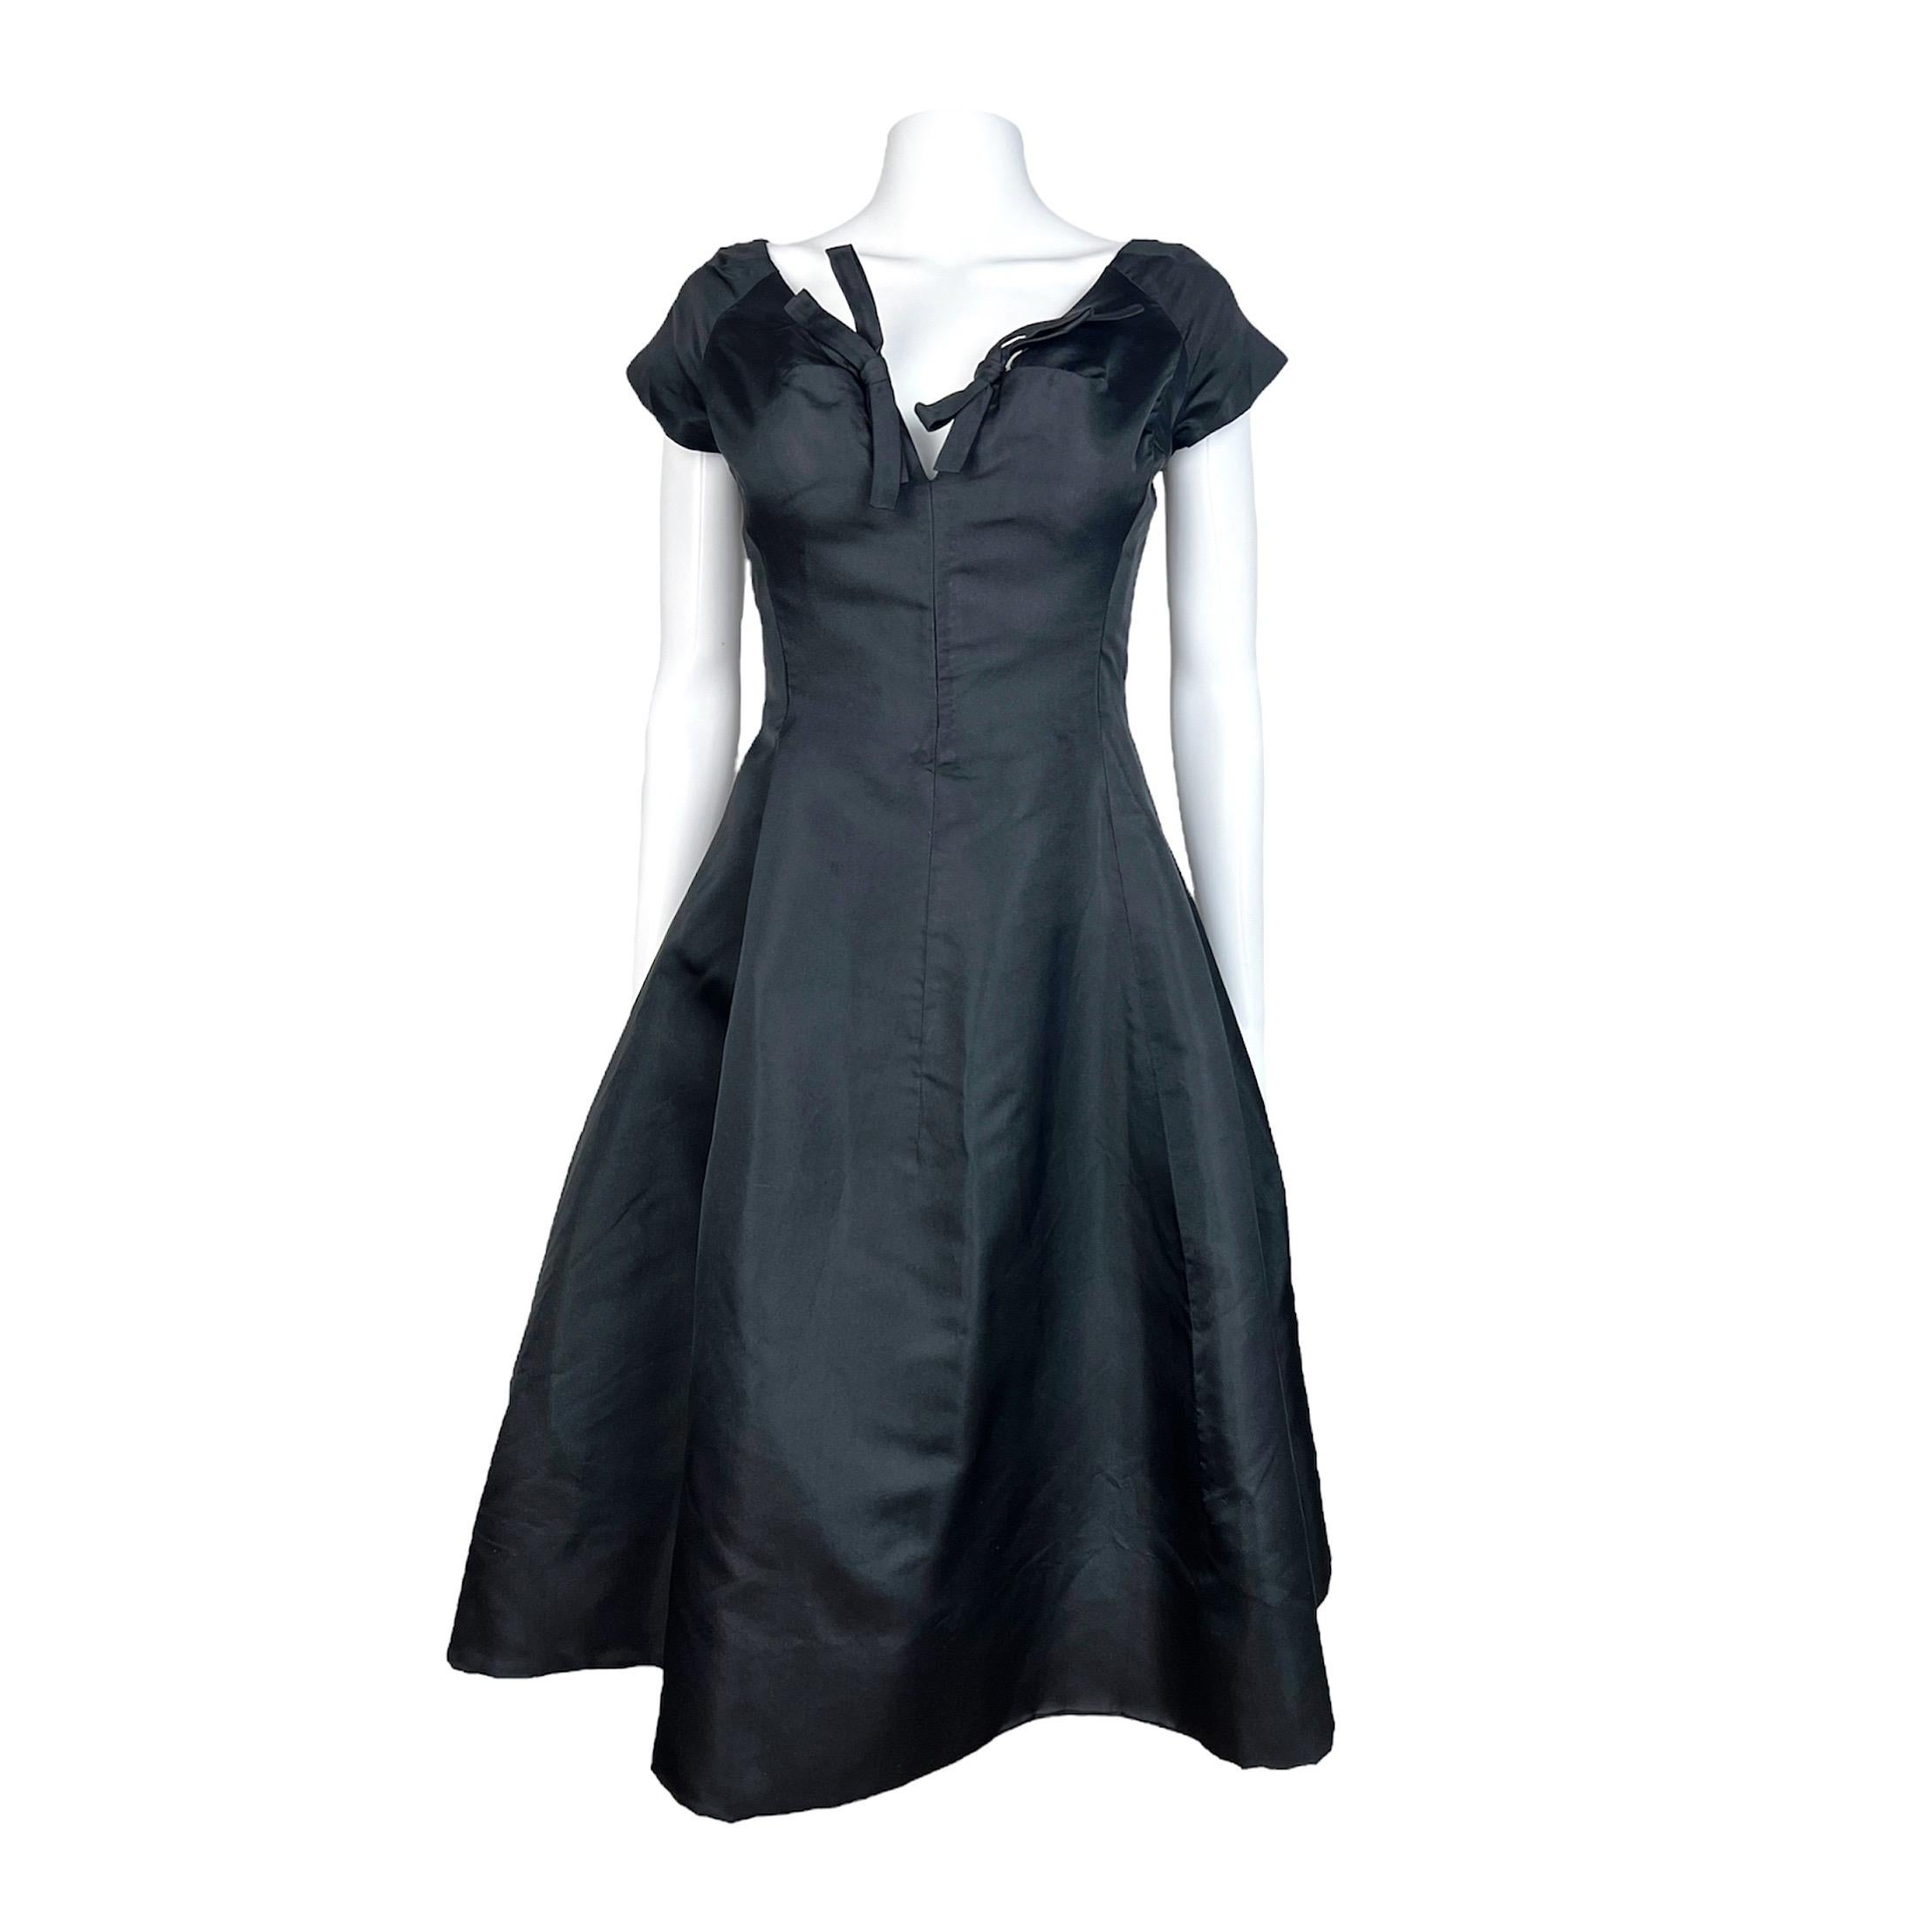 Exquisite and very rare Christian Dior by Yves Saint Laurent dress from 1958 . This dress is made out of a luxurious thick black silk and has a Christian Dior label that reads “ Patron Original”. The 